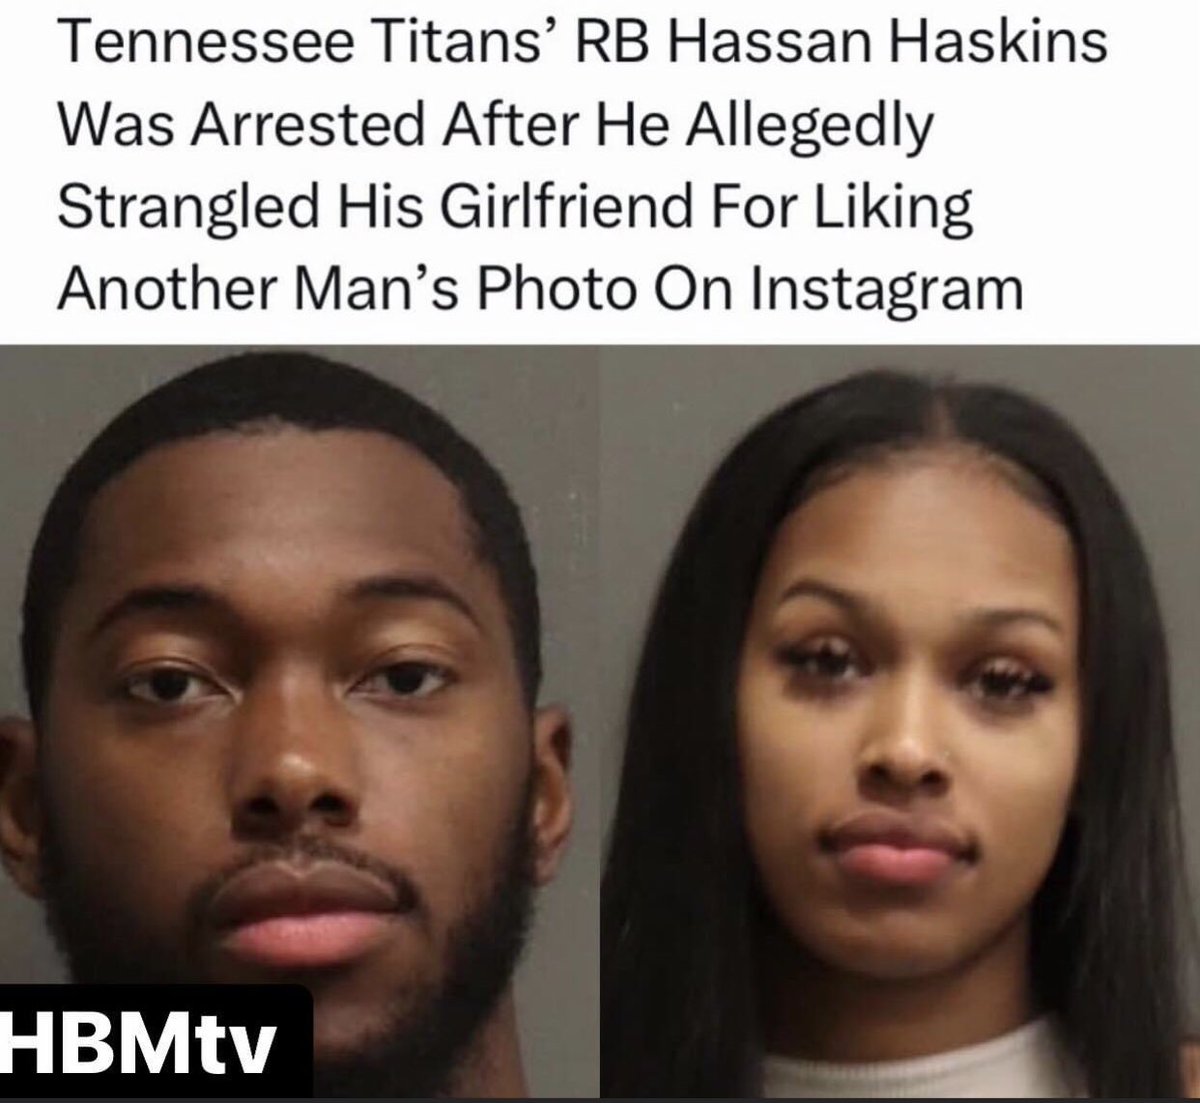 #TennesseTitans RB #HassanHaskins Arrested For Allegedly Strangled His Girl For Liking Another Mans Pic On #Instagram